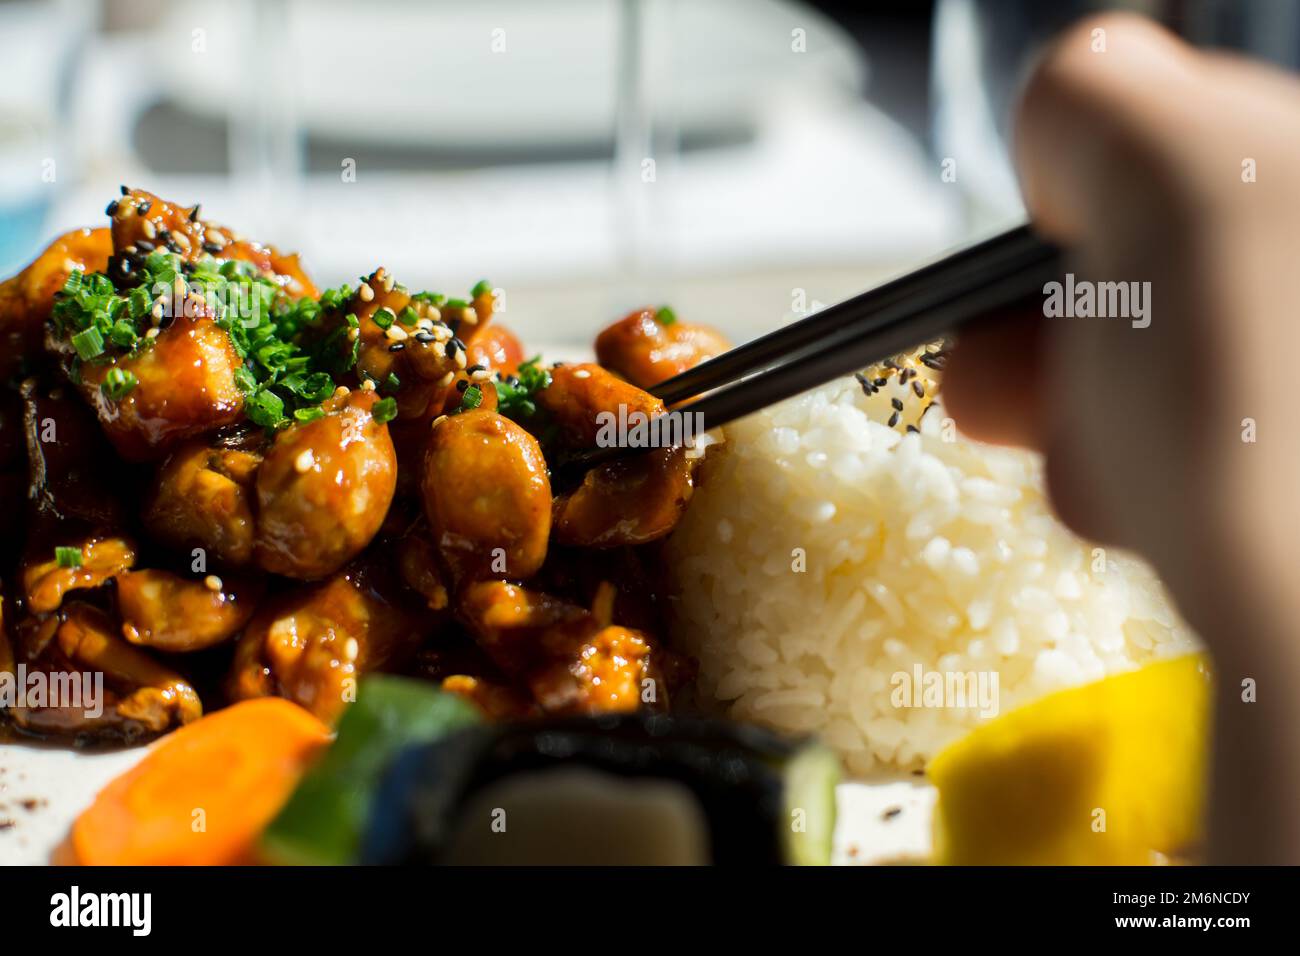 Chicken cooked in Japanese style with teriyaki sauce. Stock Photo